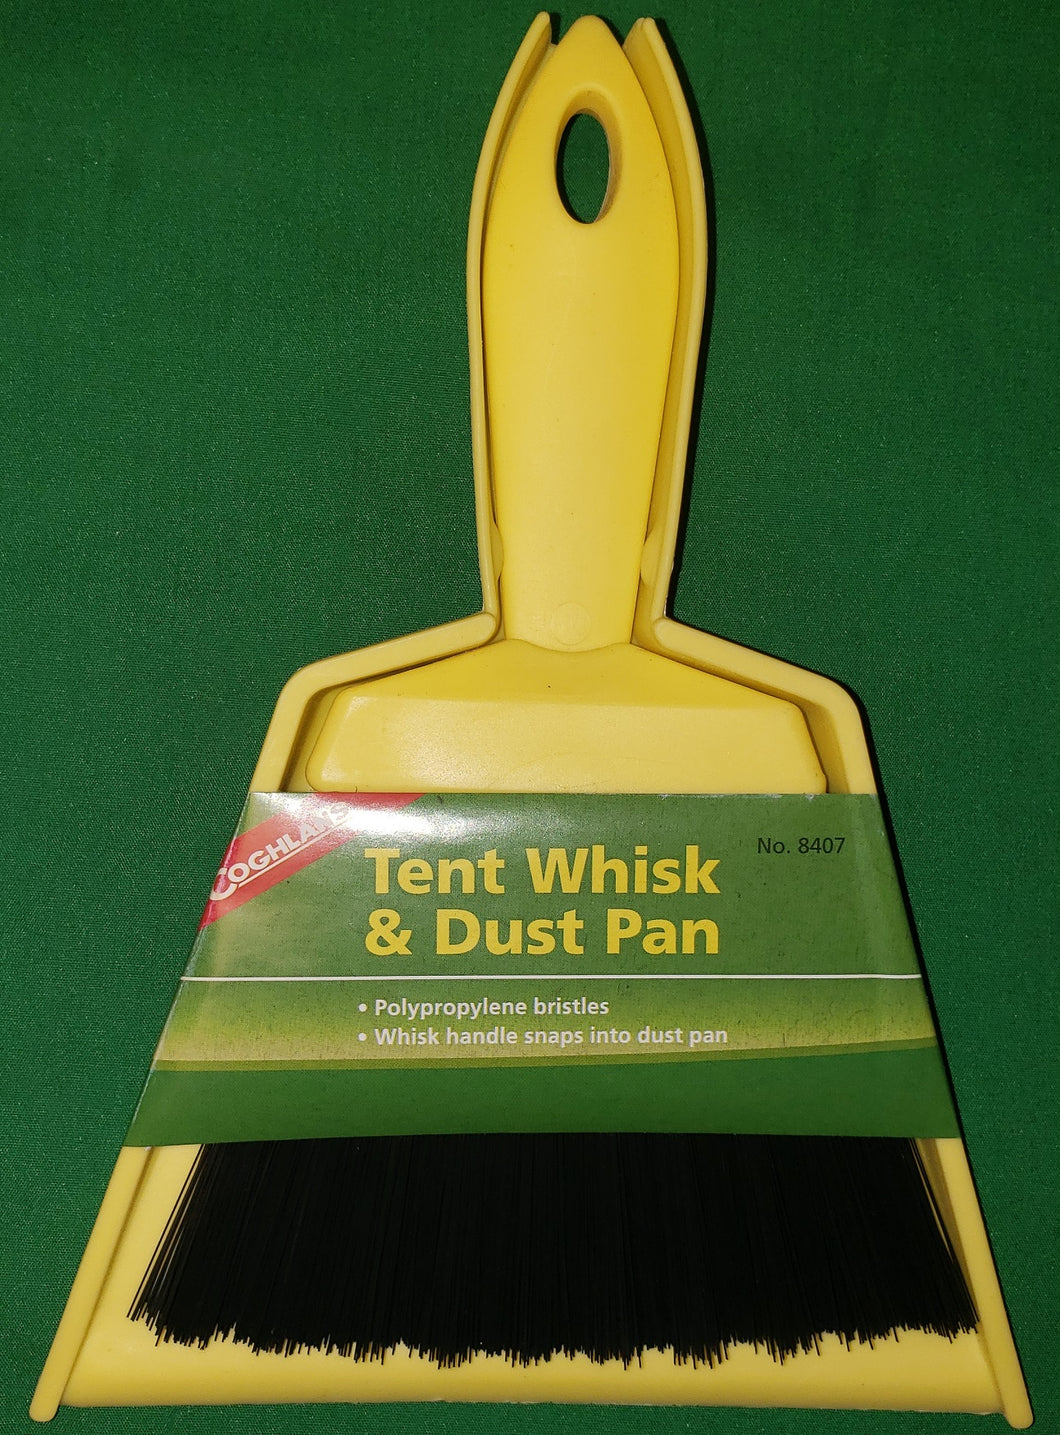 Coghlan's Tent Whisk Broom and Dust Pan Coghlans 8407